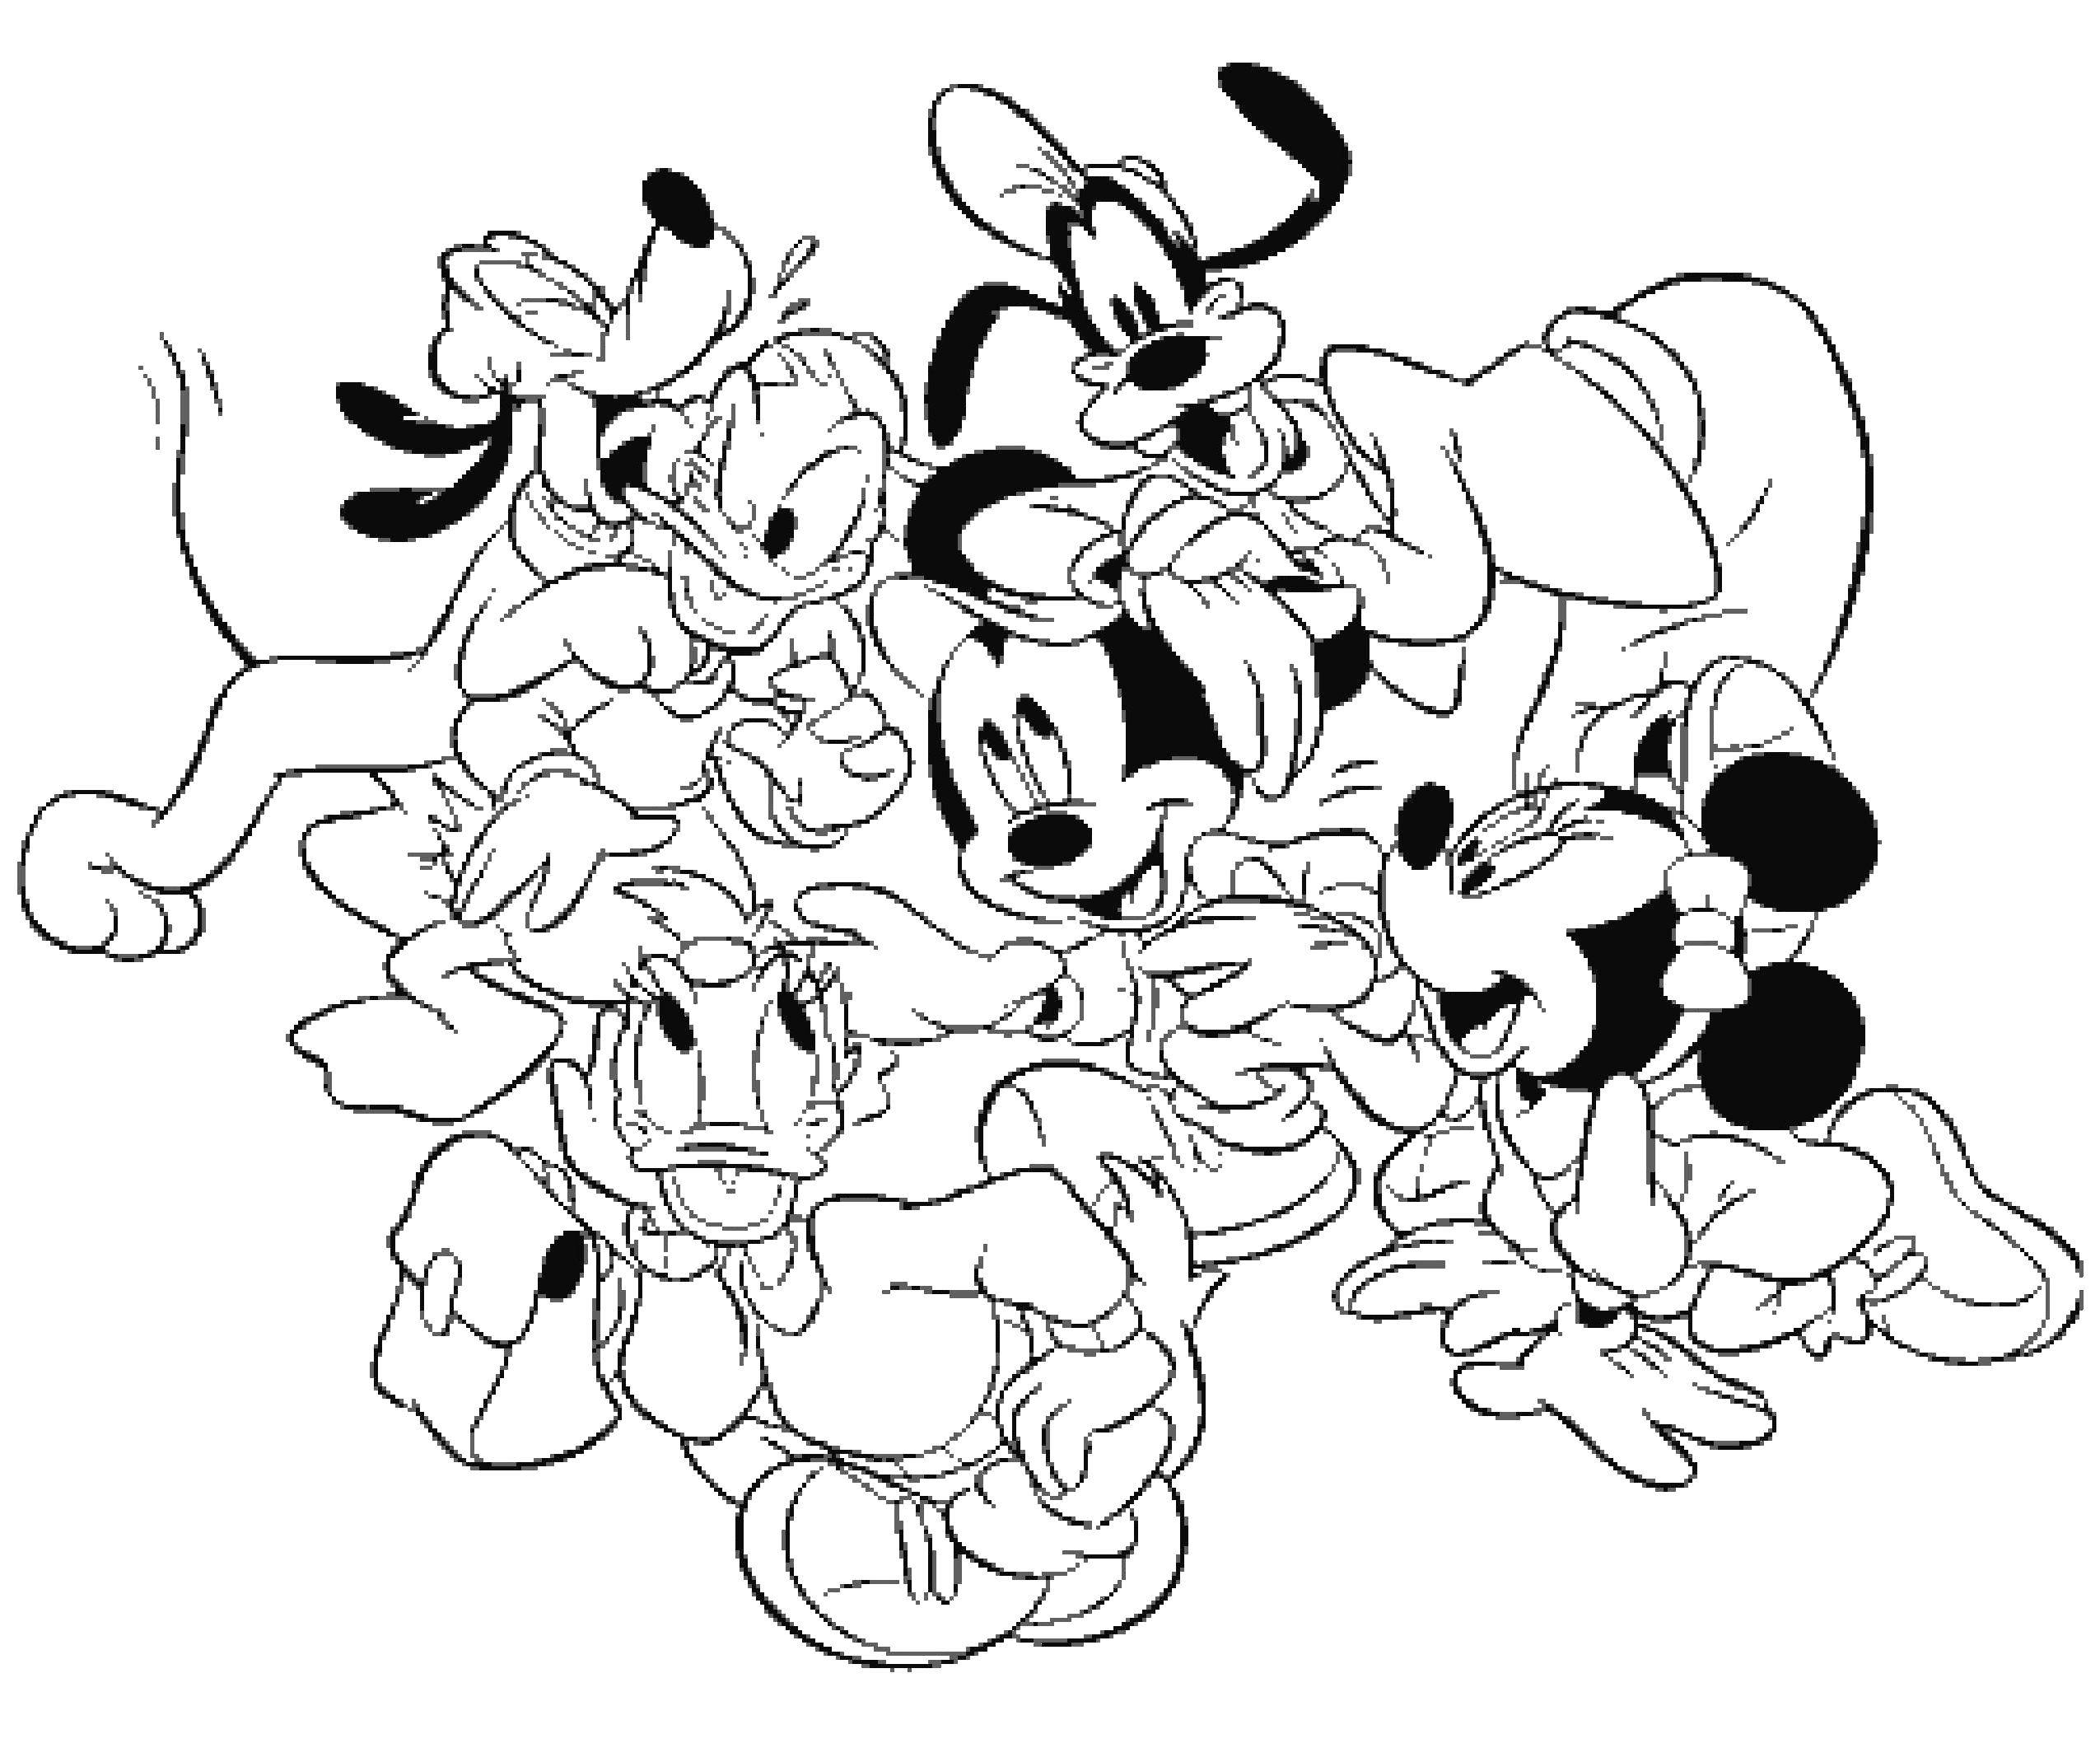 Coloring Mickey and Minnie mouse and his friends. Category Disney coloring pages. Tags:  Disney, cartoons.